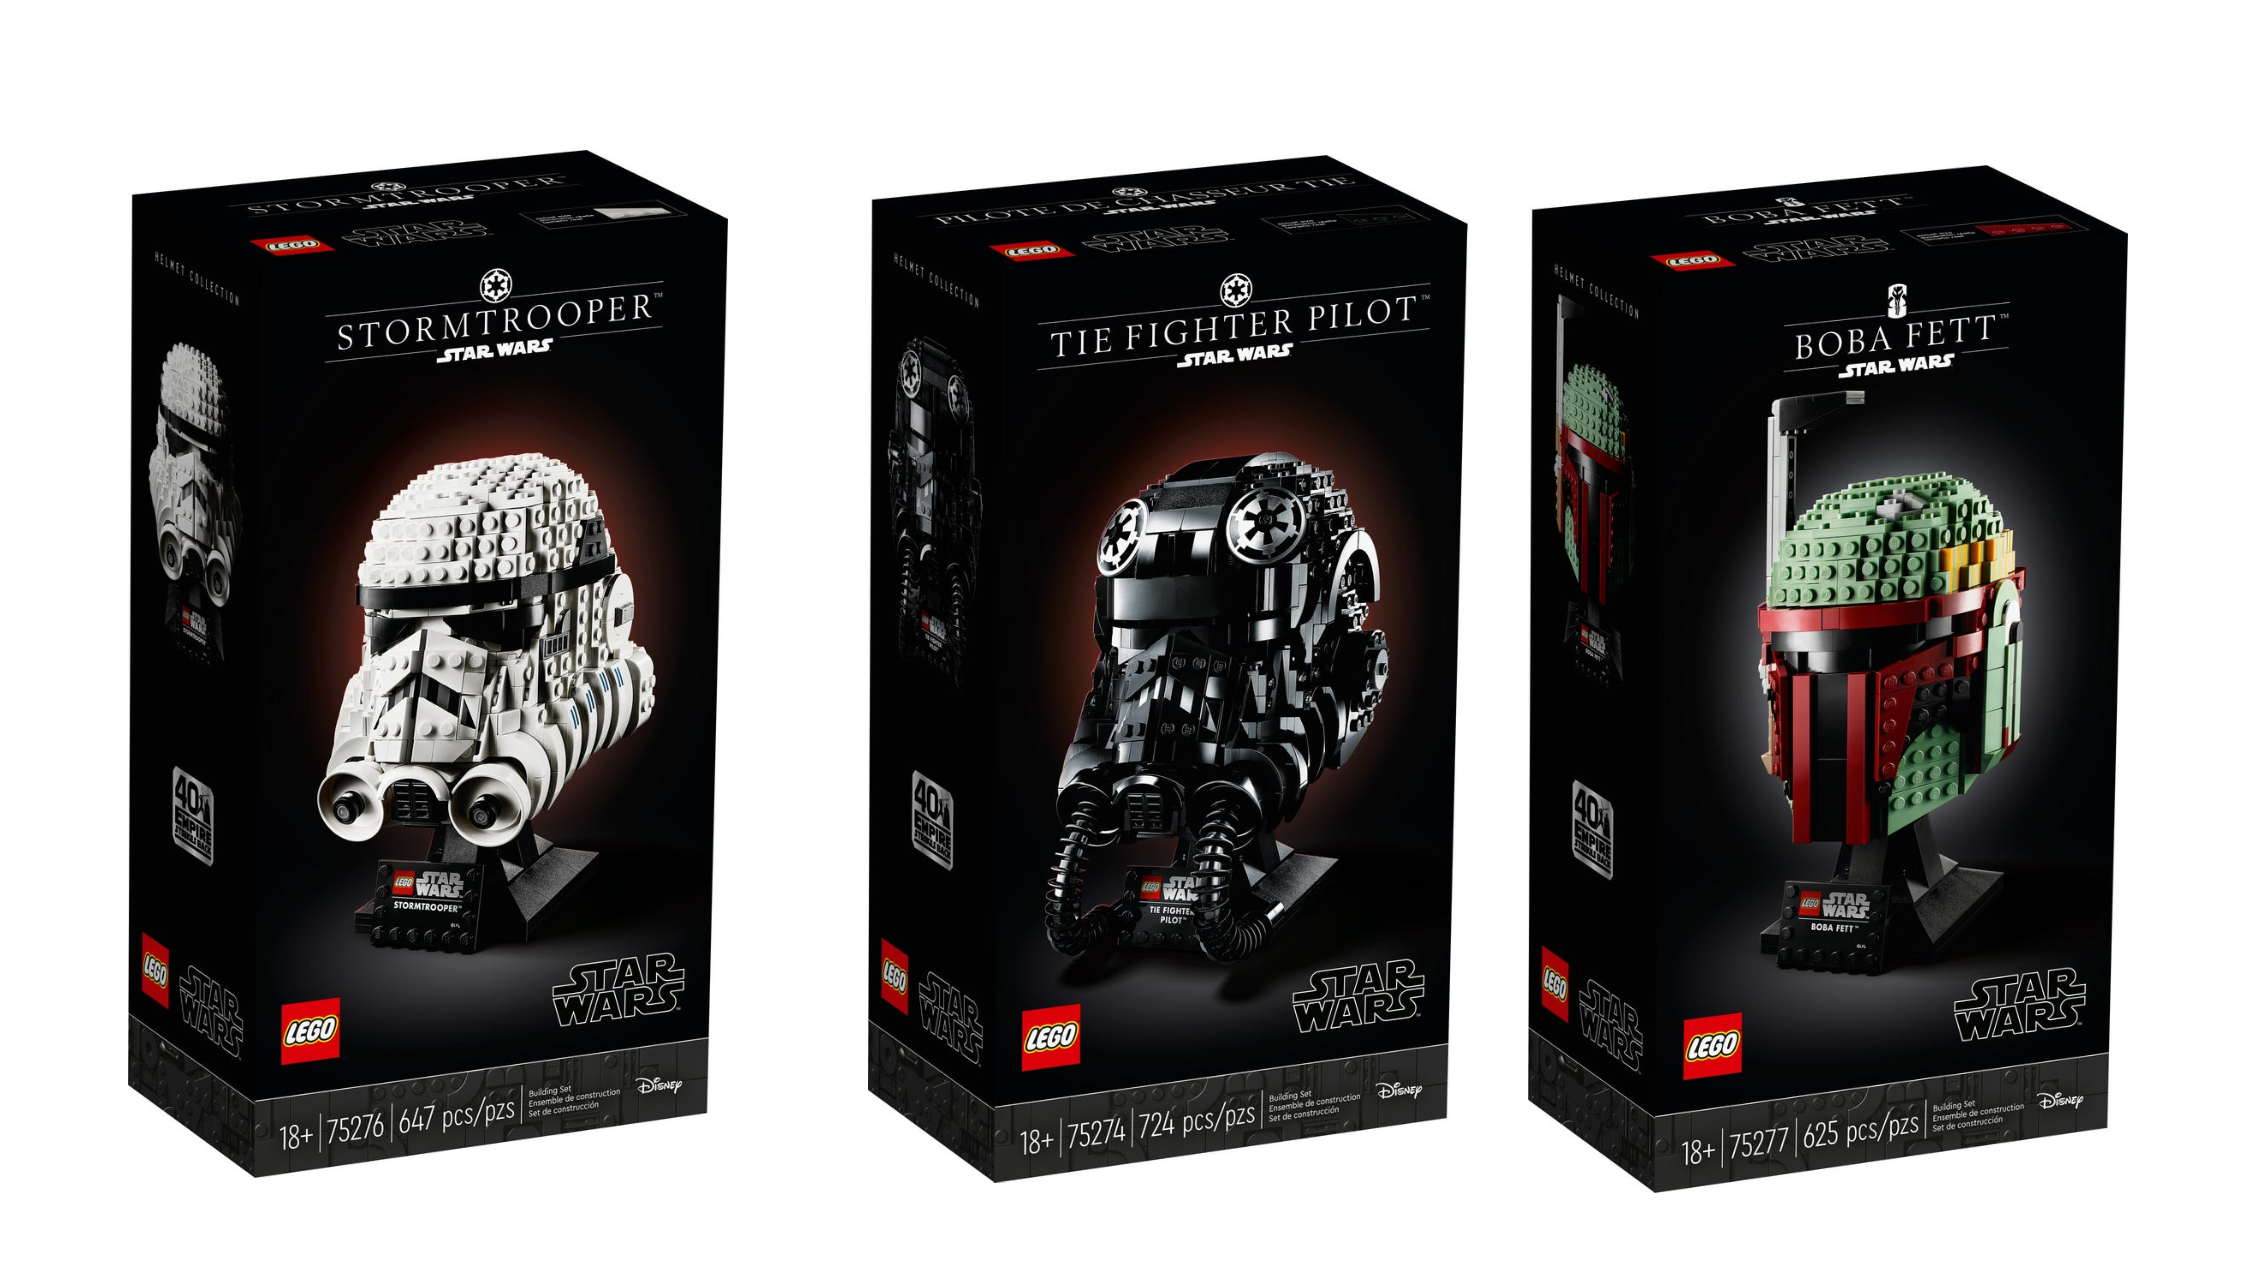 LEGO Gets It, Designs New Star Wars Kits And Packaging Aimed At Adults